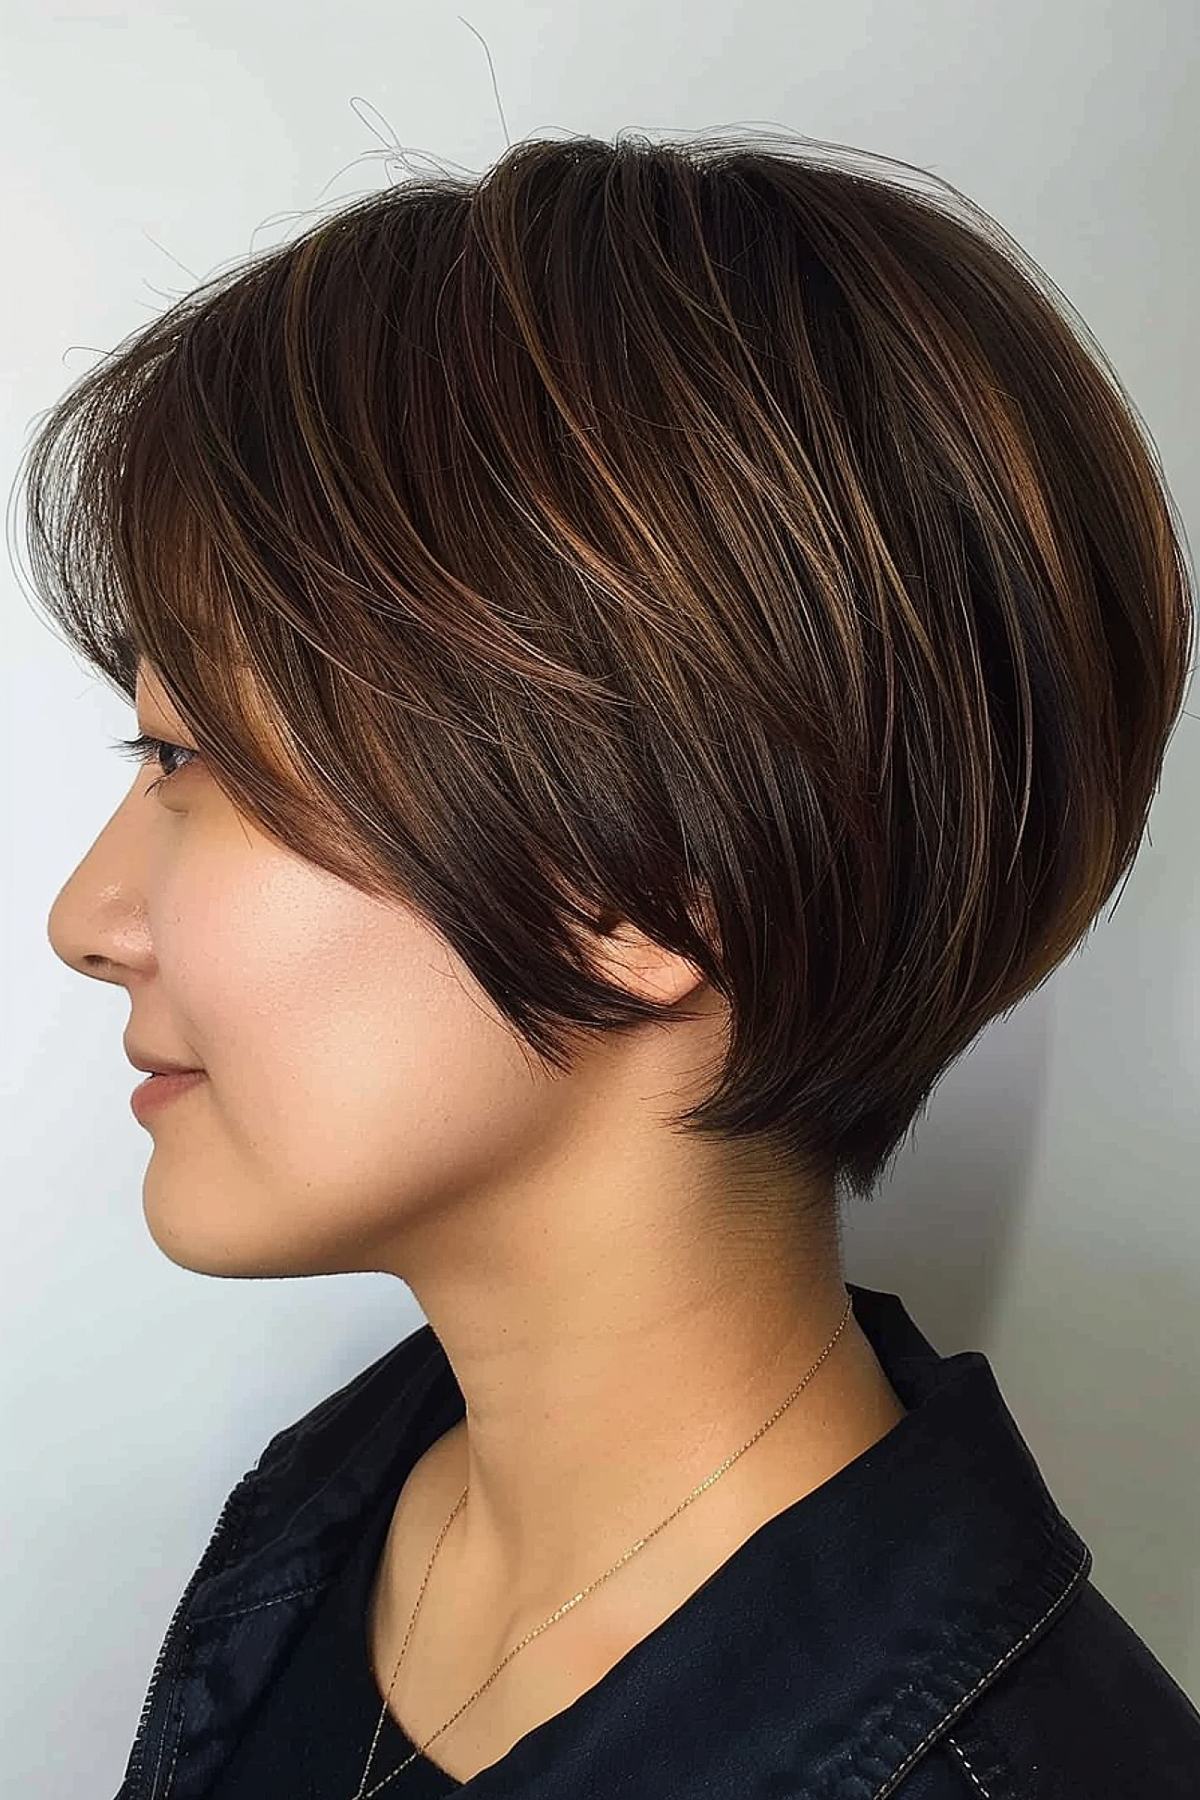 Short Wedge Haircut with Caramel Highlights and Textured Layers